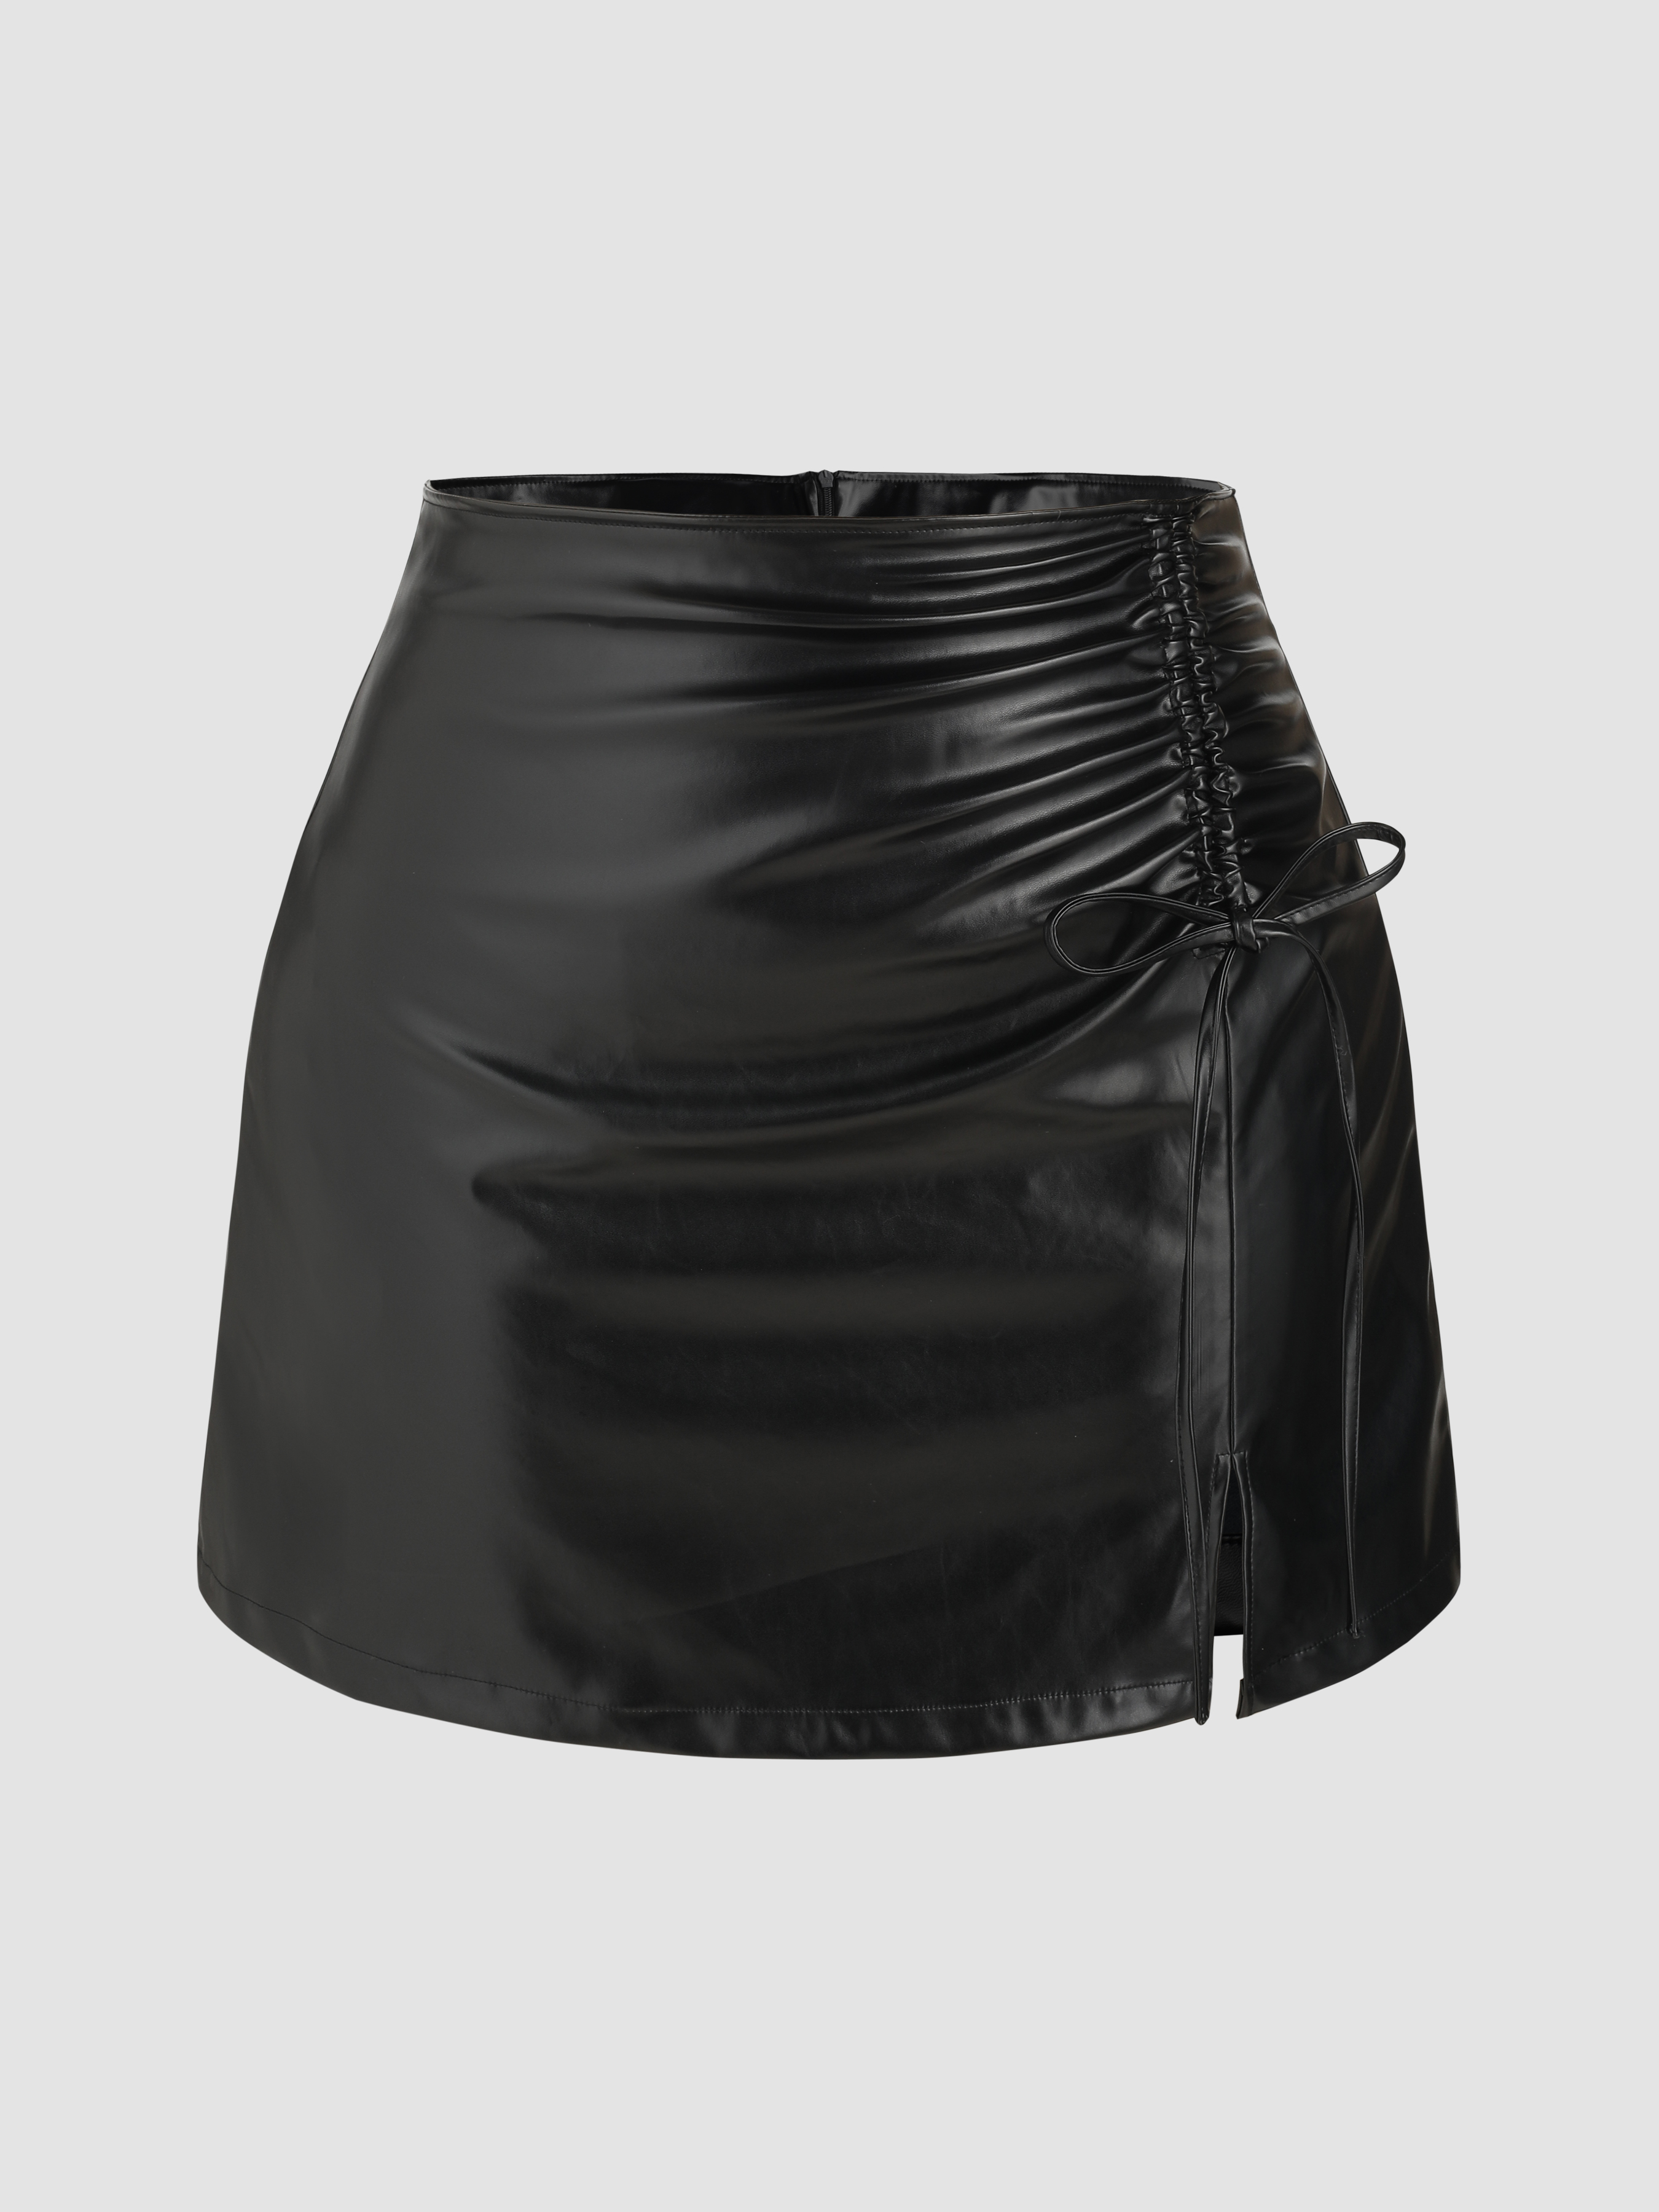 Faux Leather Skirt by Zero Degrees Celsius